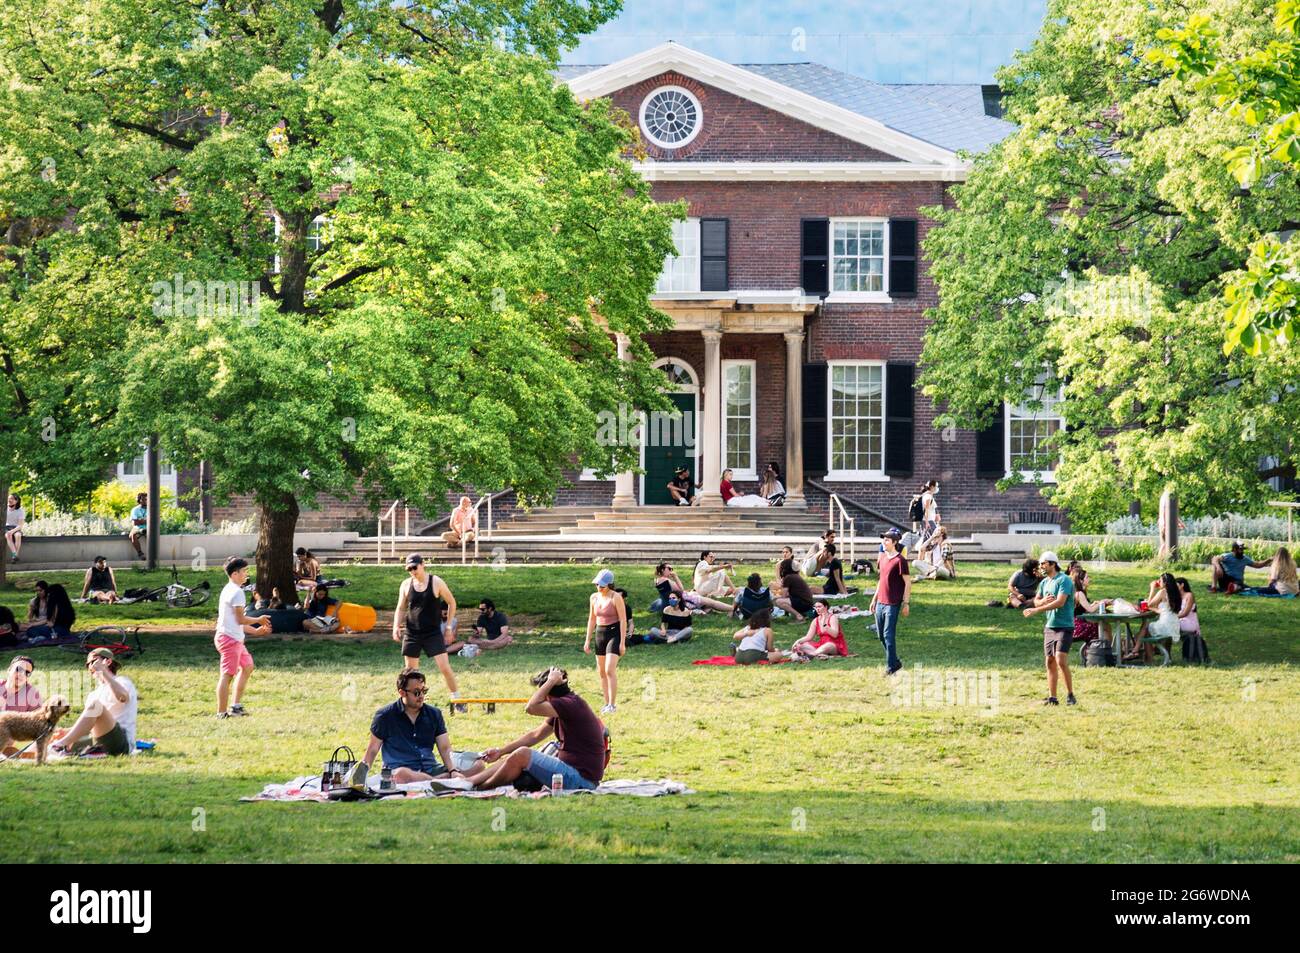 TORONTO, CANADA - 06 05 2021: Torontonians enjoying sunny weather and lifting of stay at home order in the Grange Park in downtown Toronto with Art Stock Photo